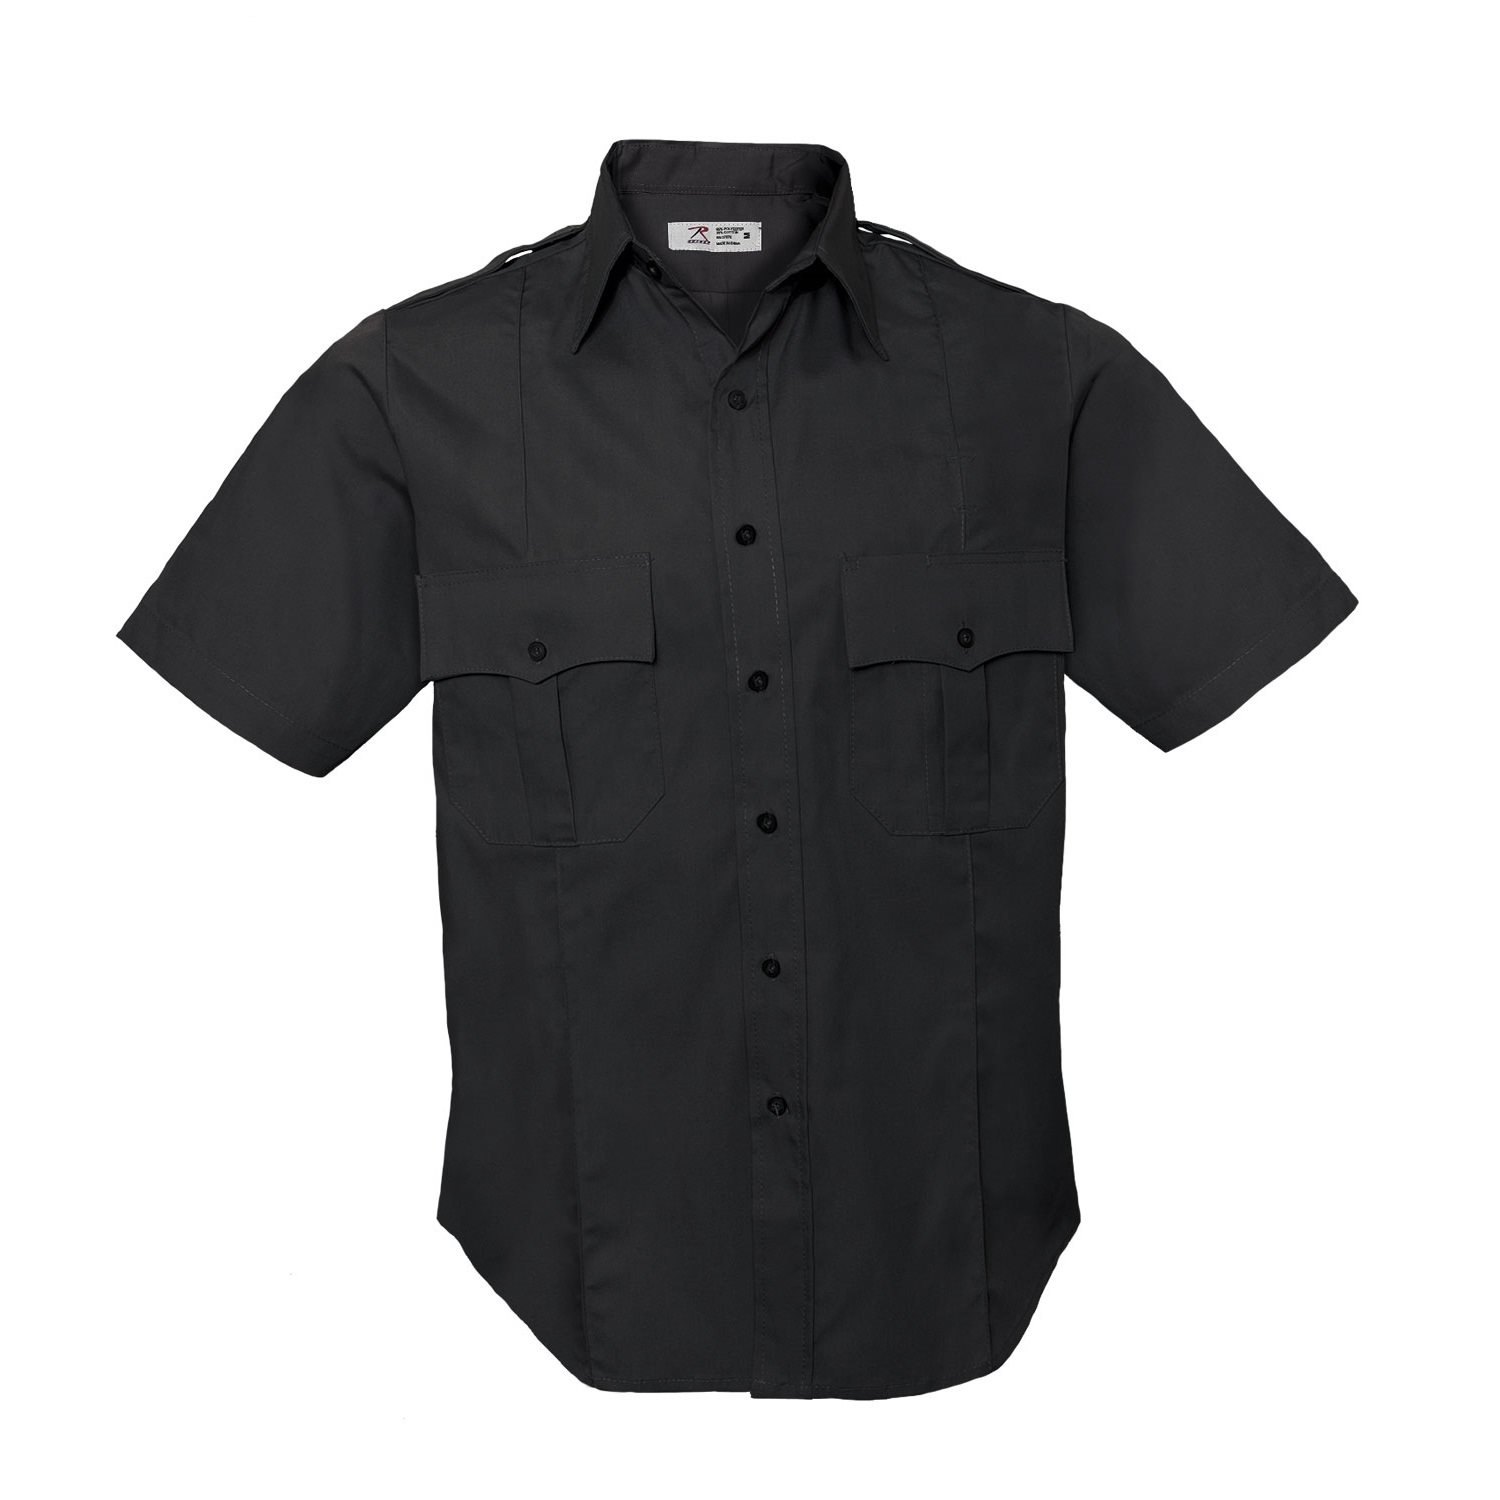 POLICE AND SECURITY shirt short sleeve BLUE ROTHCO 30020 L-11